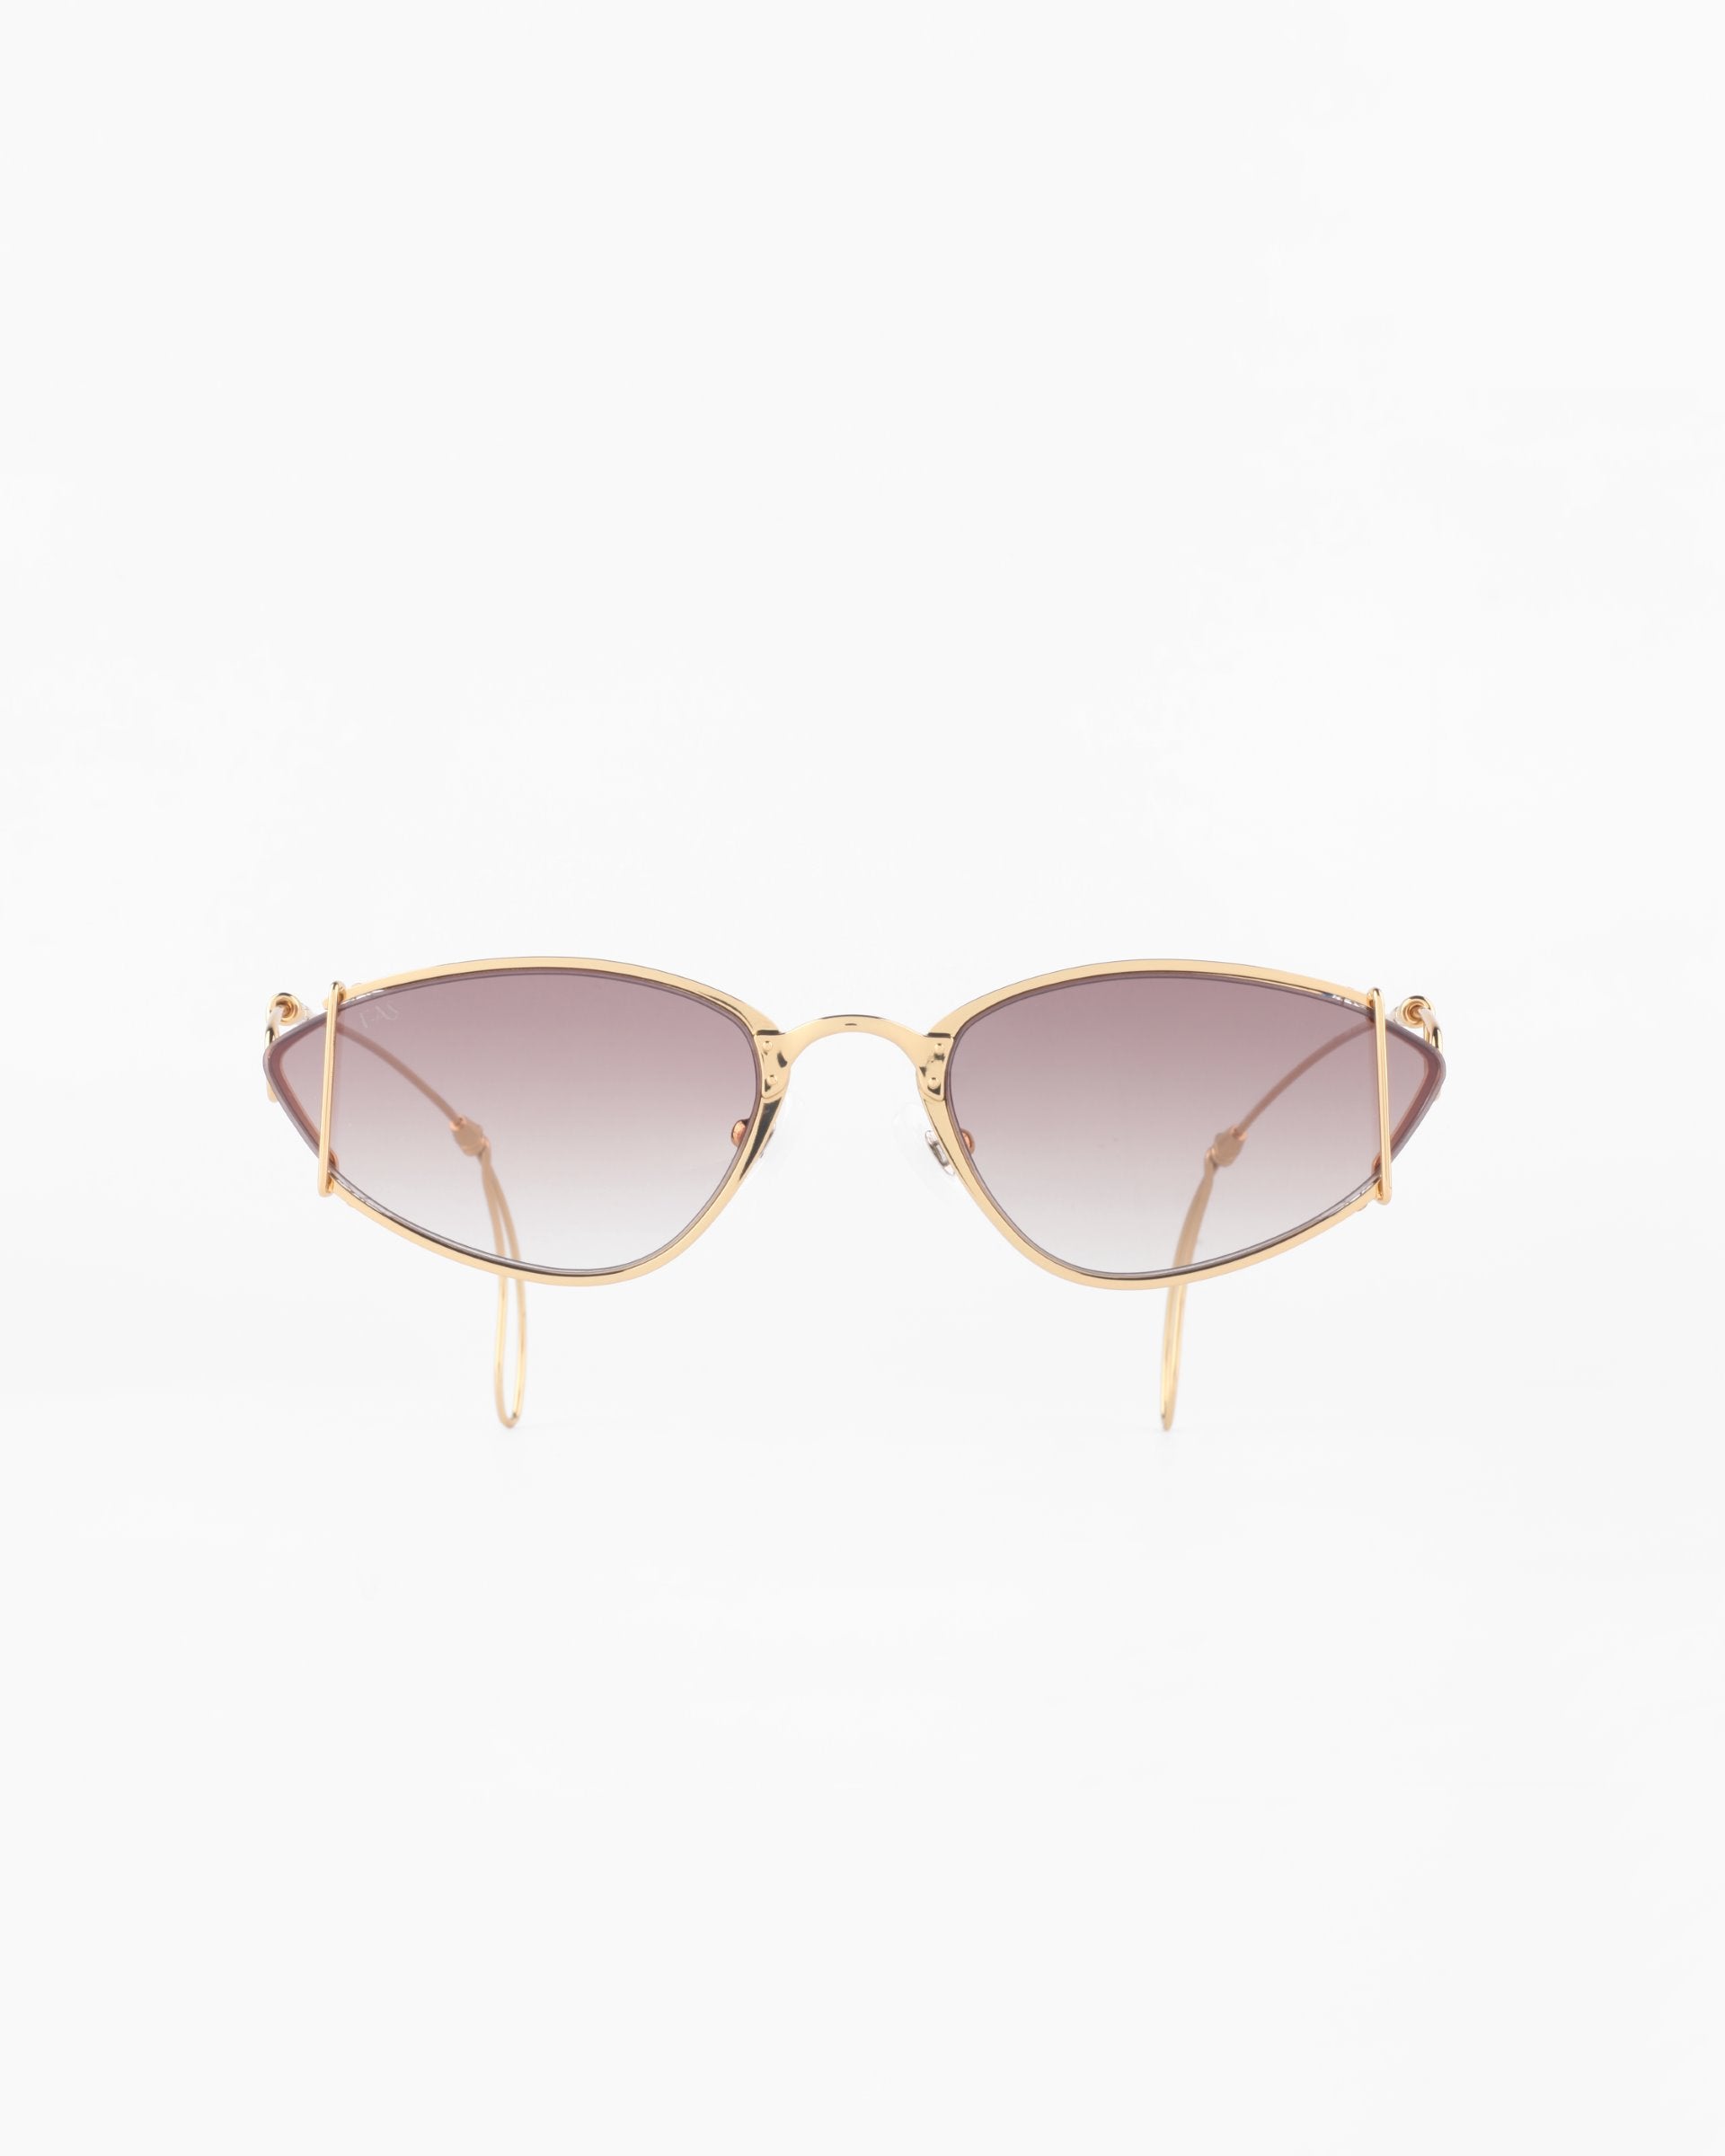 A pair of stylish, 18-karat gold-plated sunglasses with brown-tinted lenses. The Ornate by For Art&#39;s Sake® sunglasses have a sleek, modern design and feature thin wire temples. They offer 100% UVA &amp; UVB protection and are set against a plain, white background.